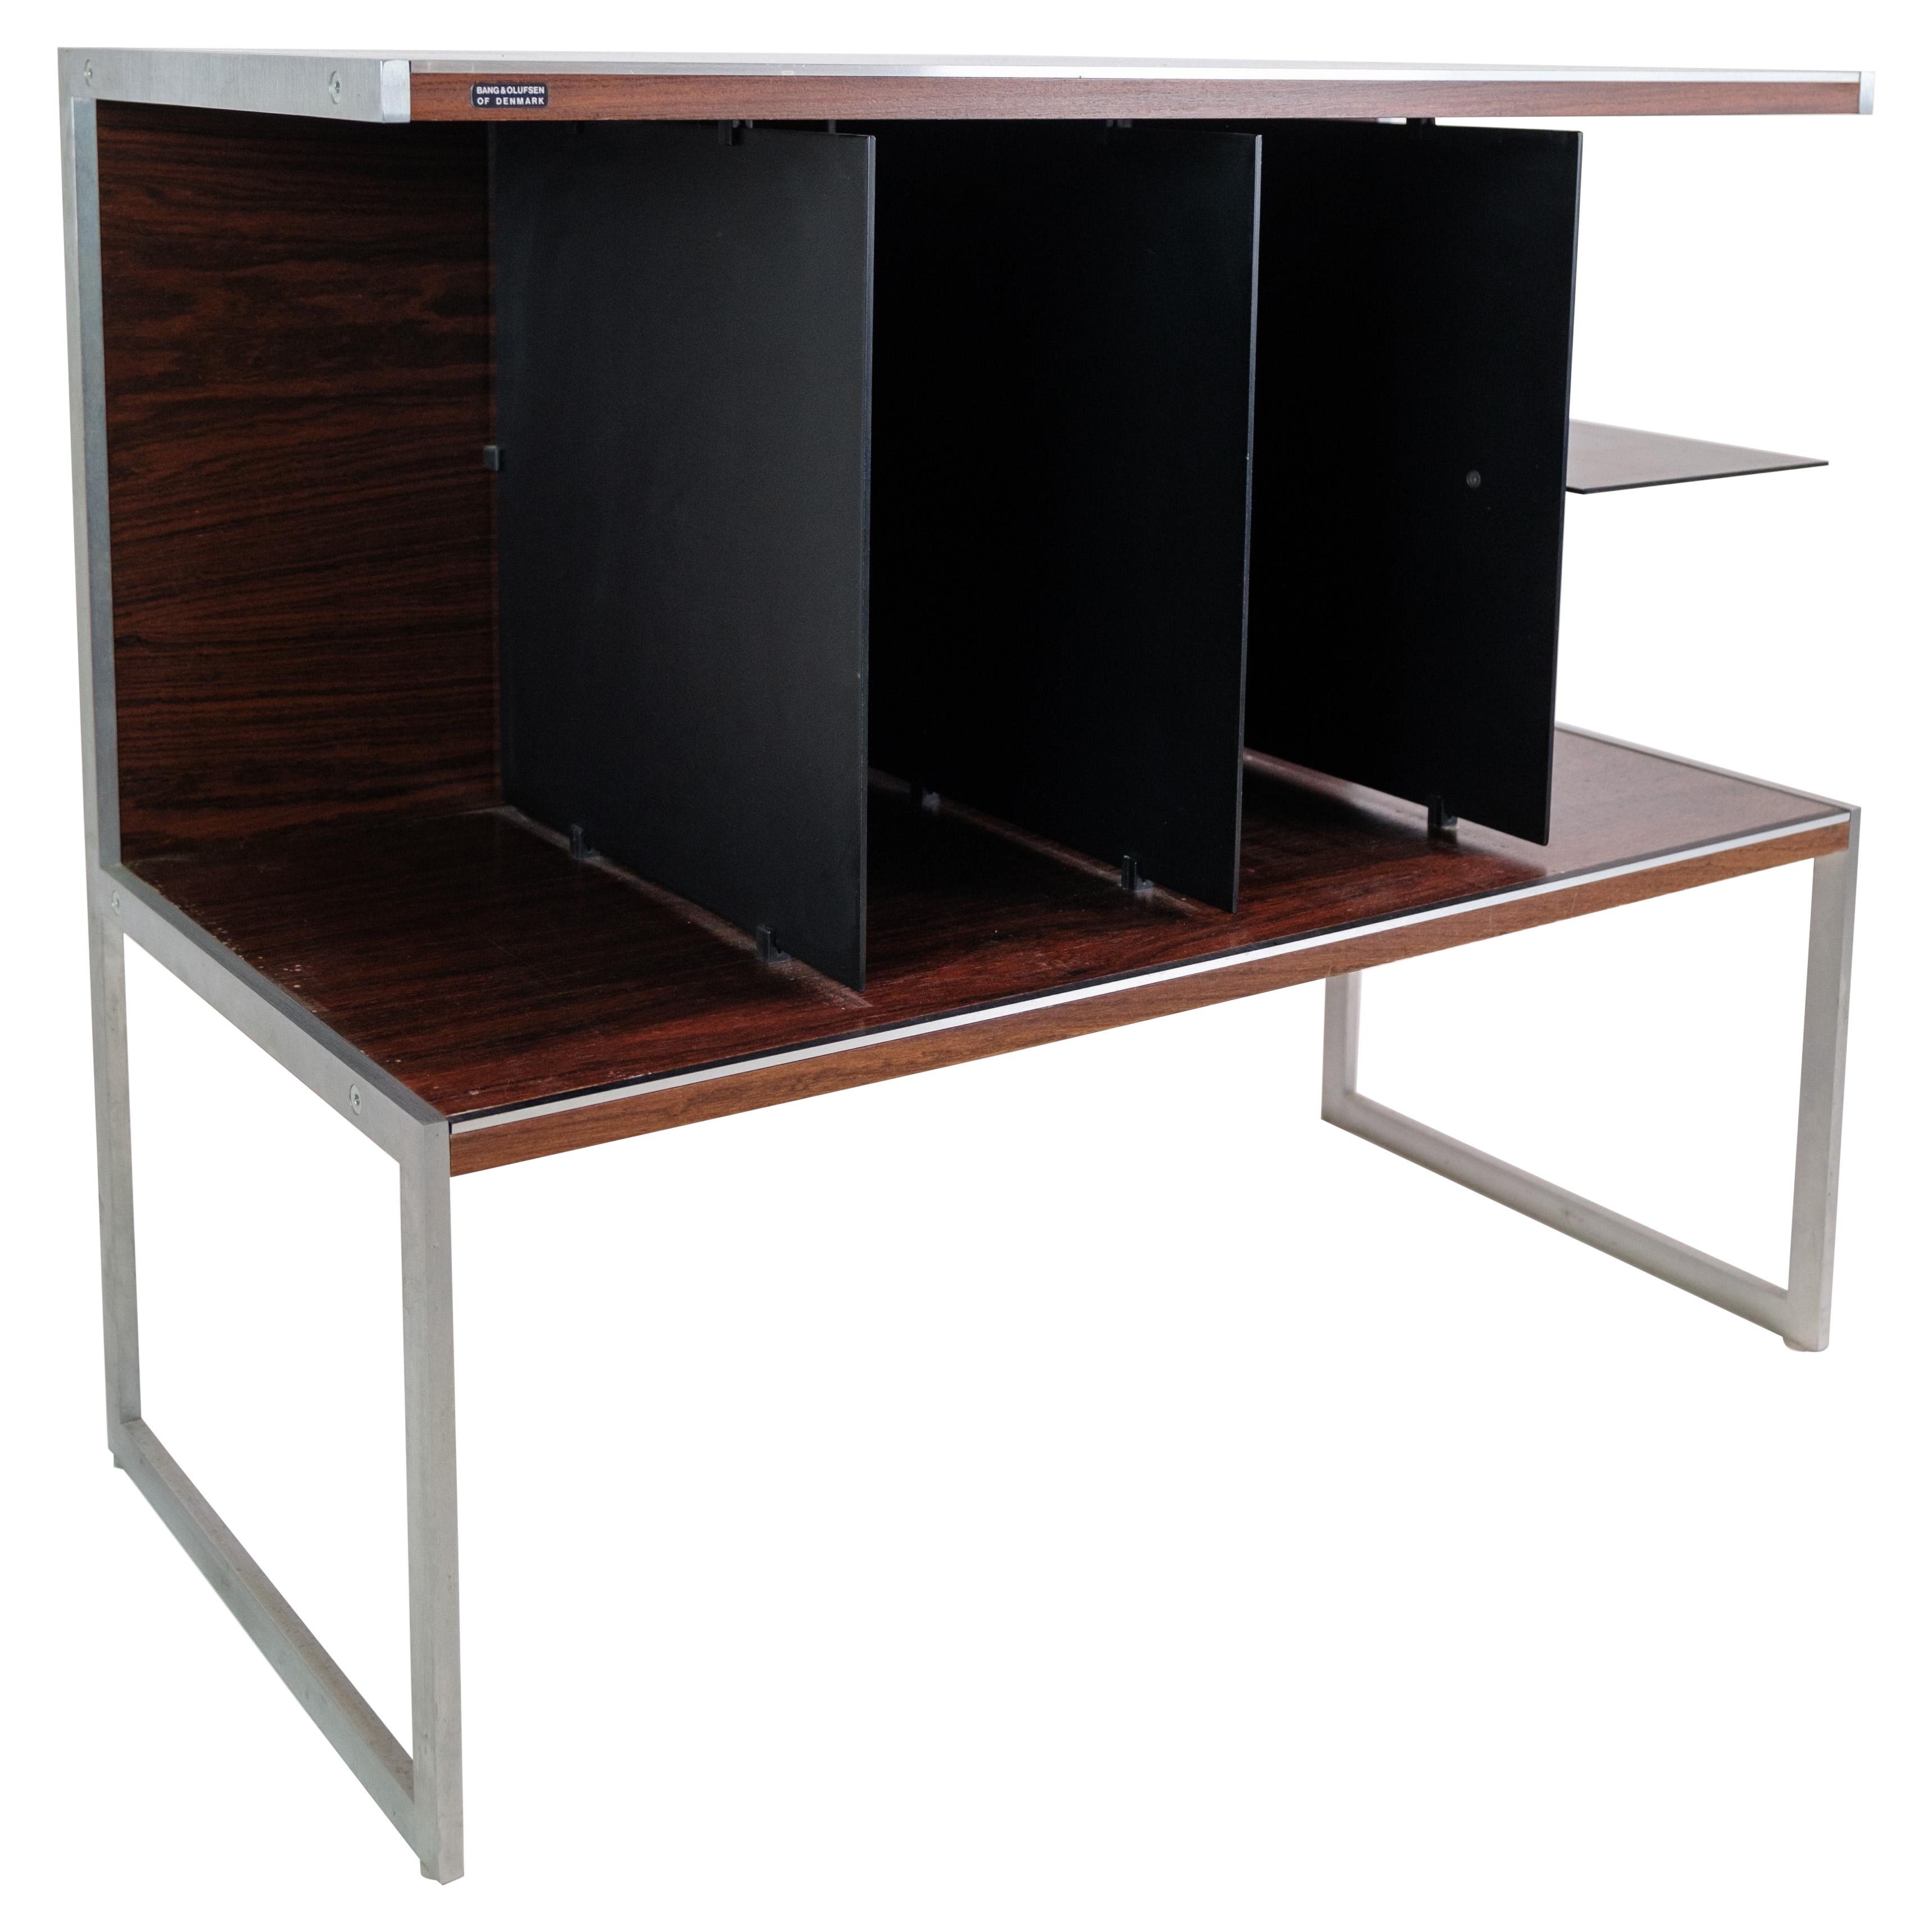 Tv Furniture Made In Rosewood By Jacob Jensen Made By Bang & Olufsen From 1970s